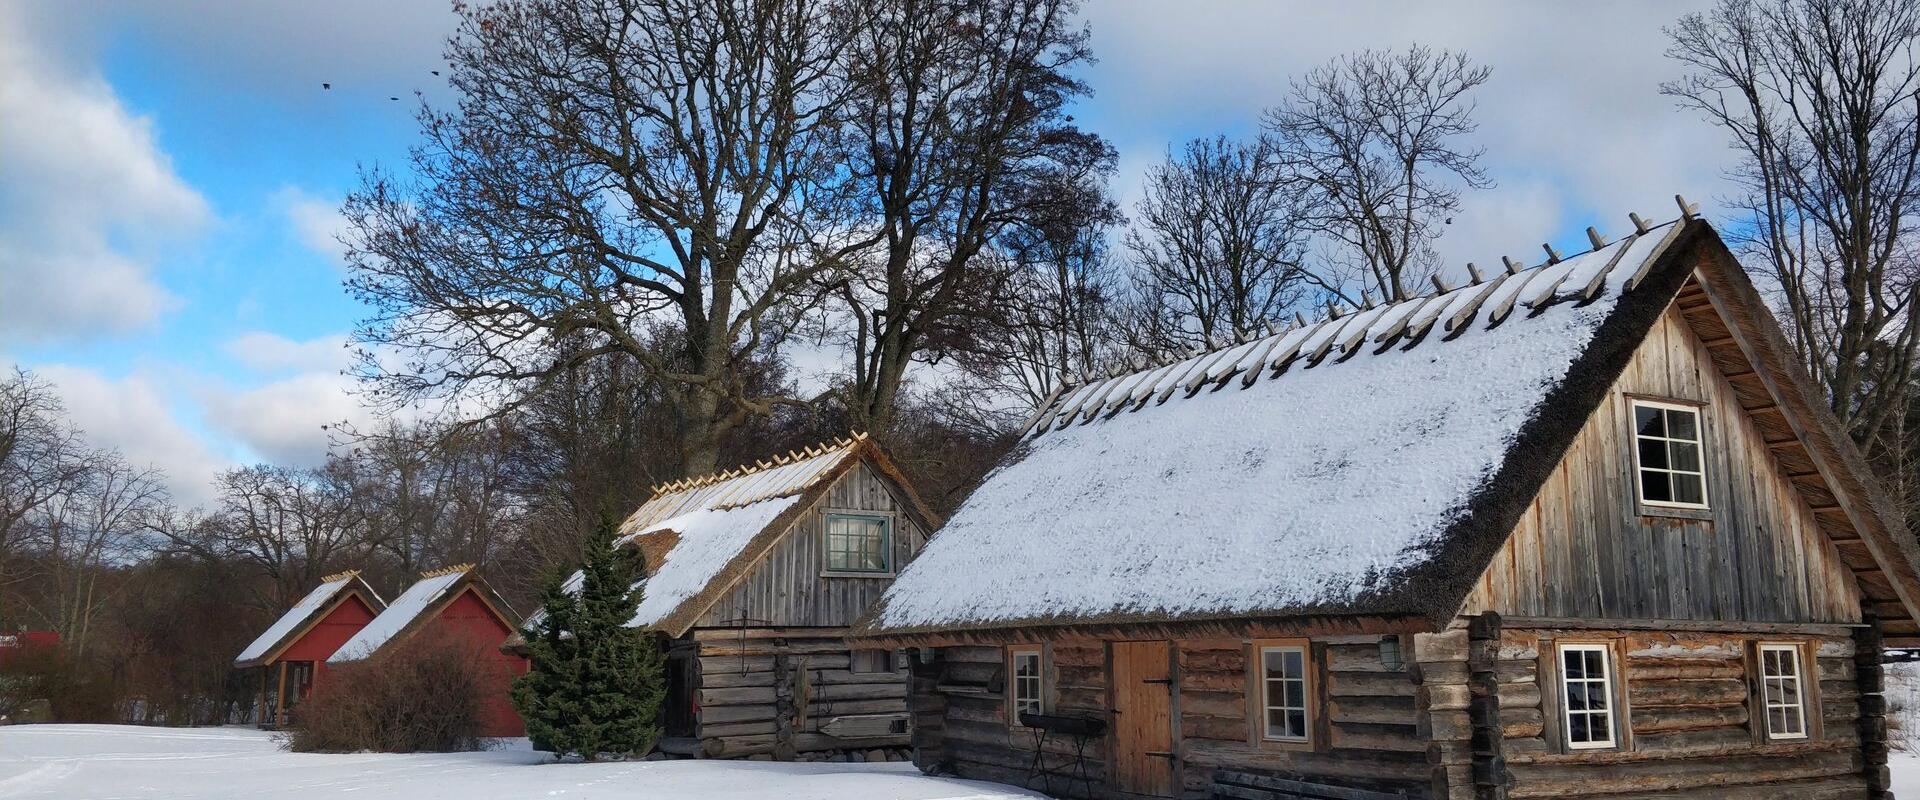 Liise Farm cottages in winter